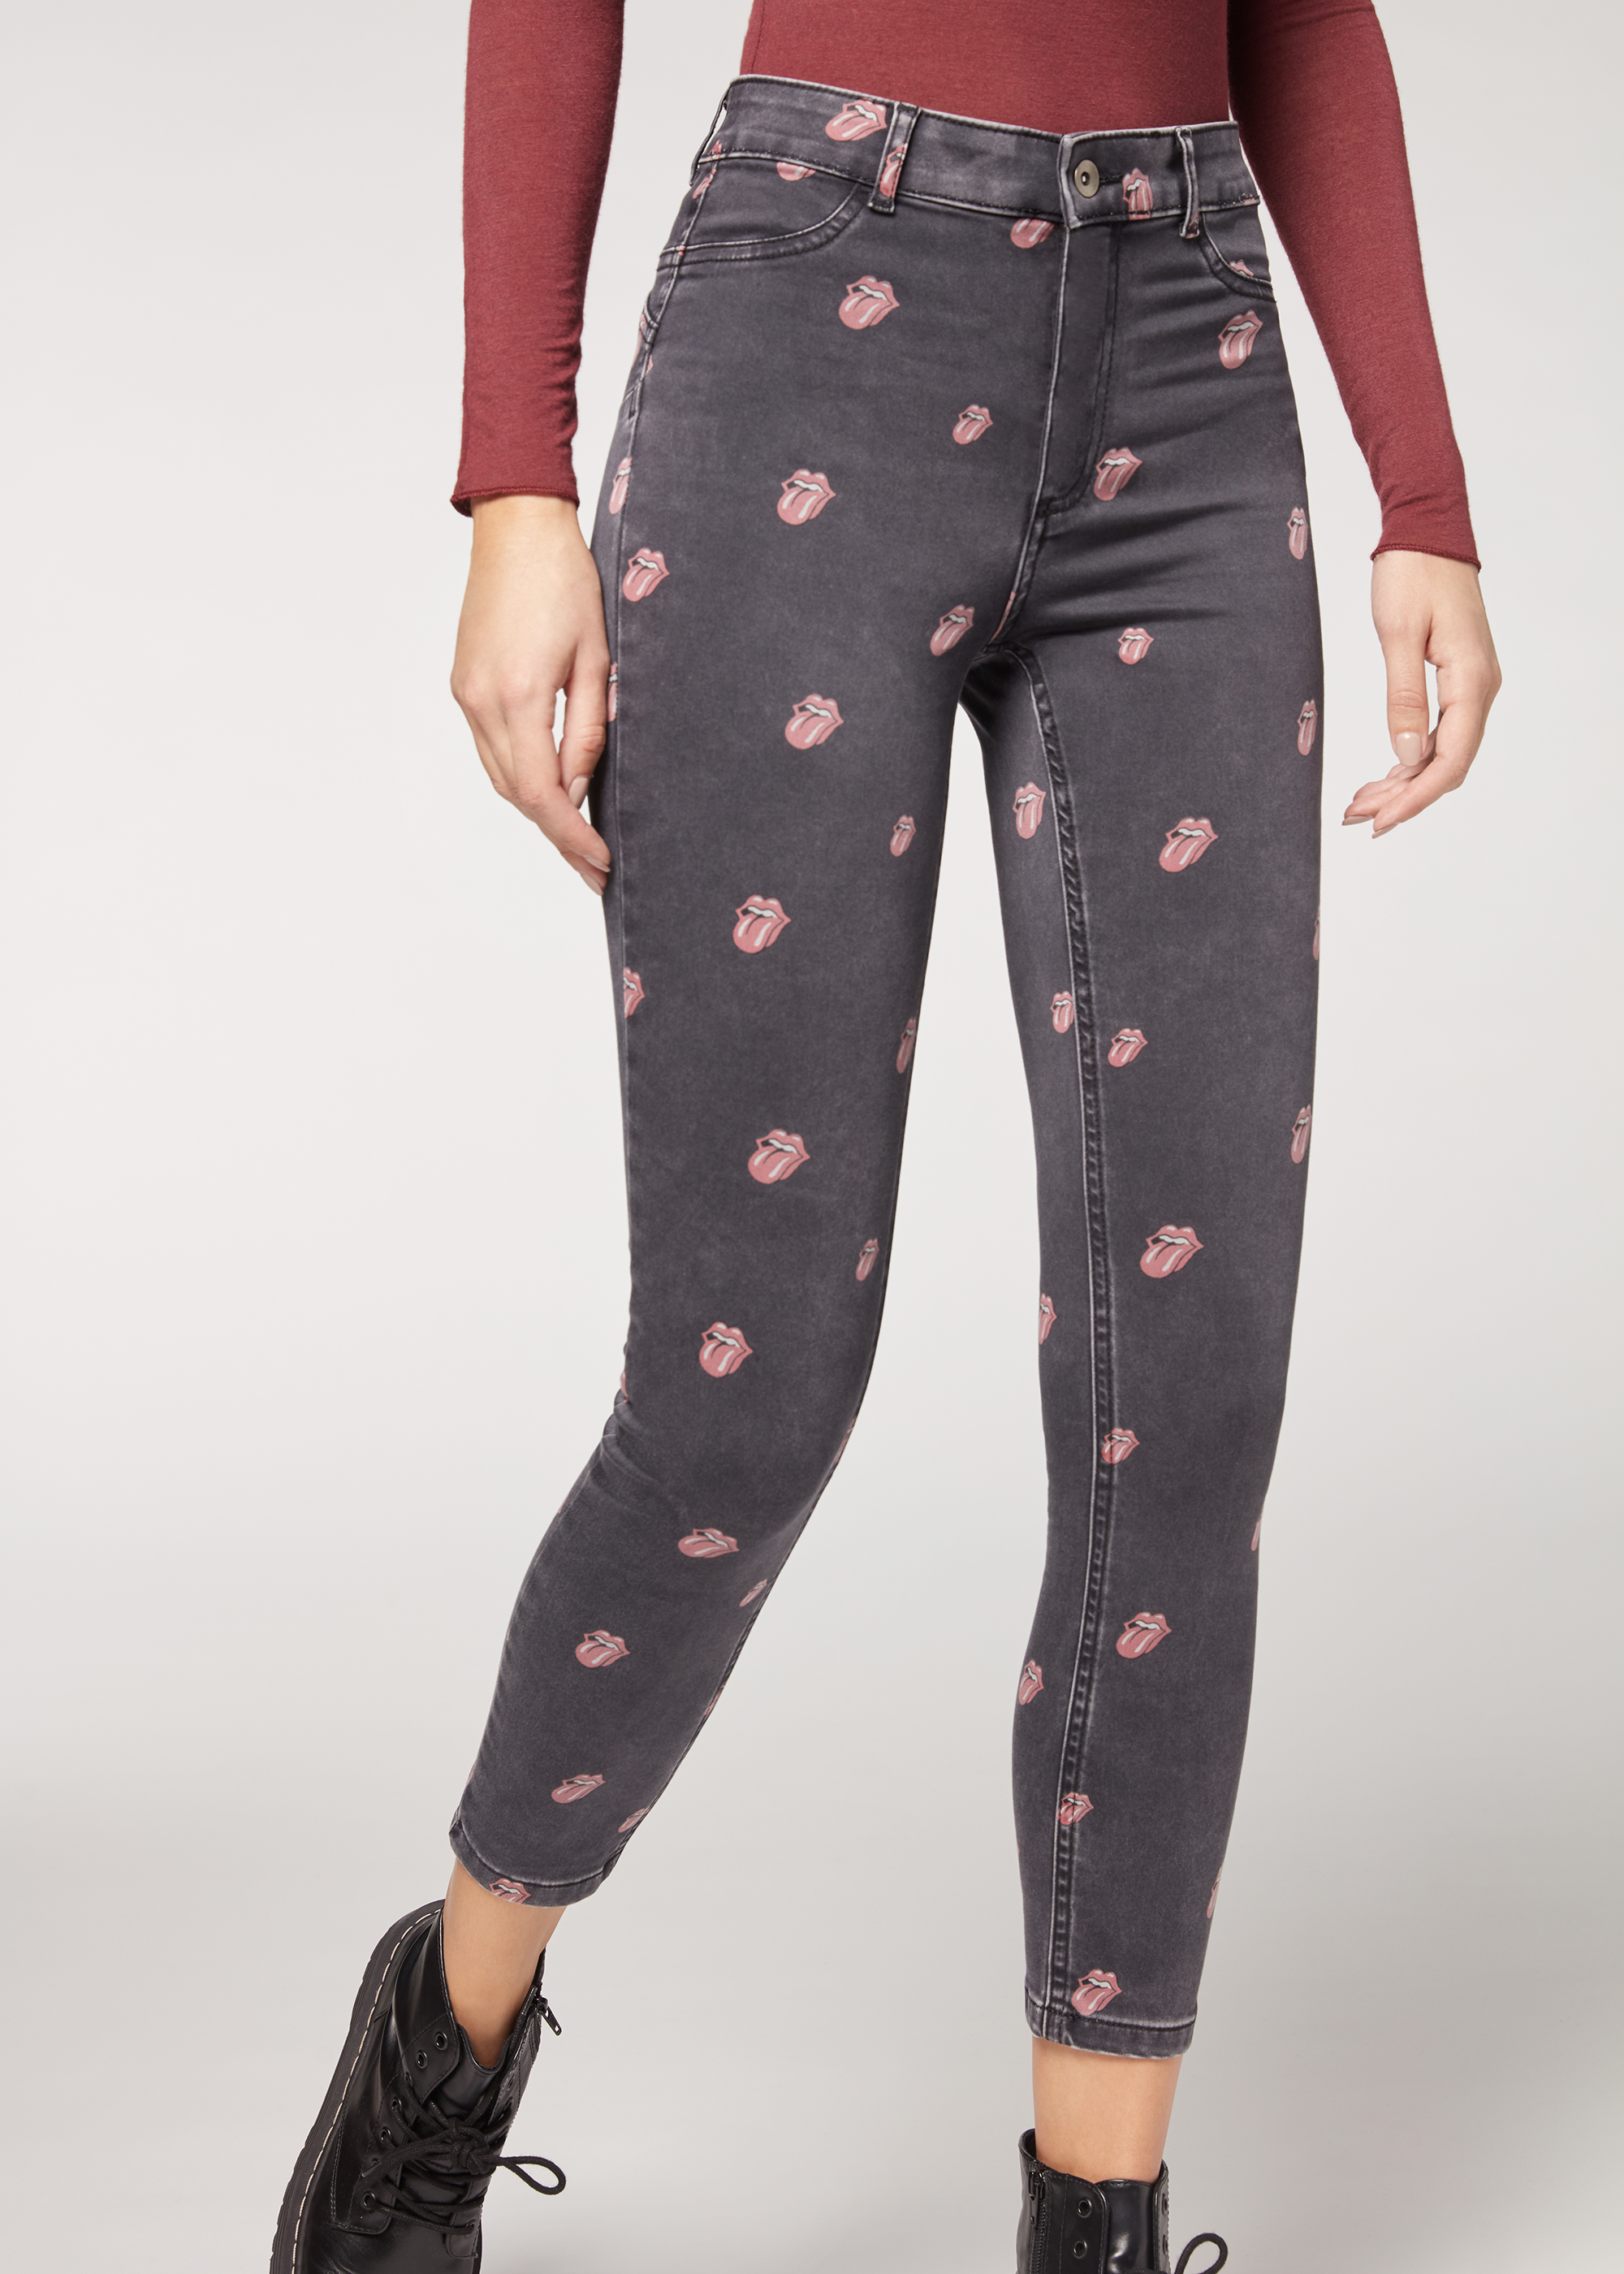 Rolling Stones Soft Touch Up Leggings - Calzedonia